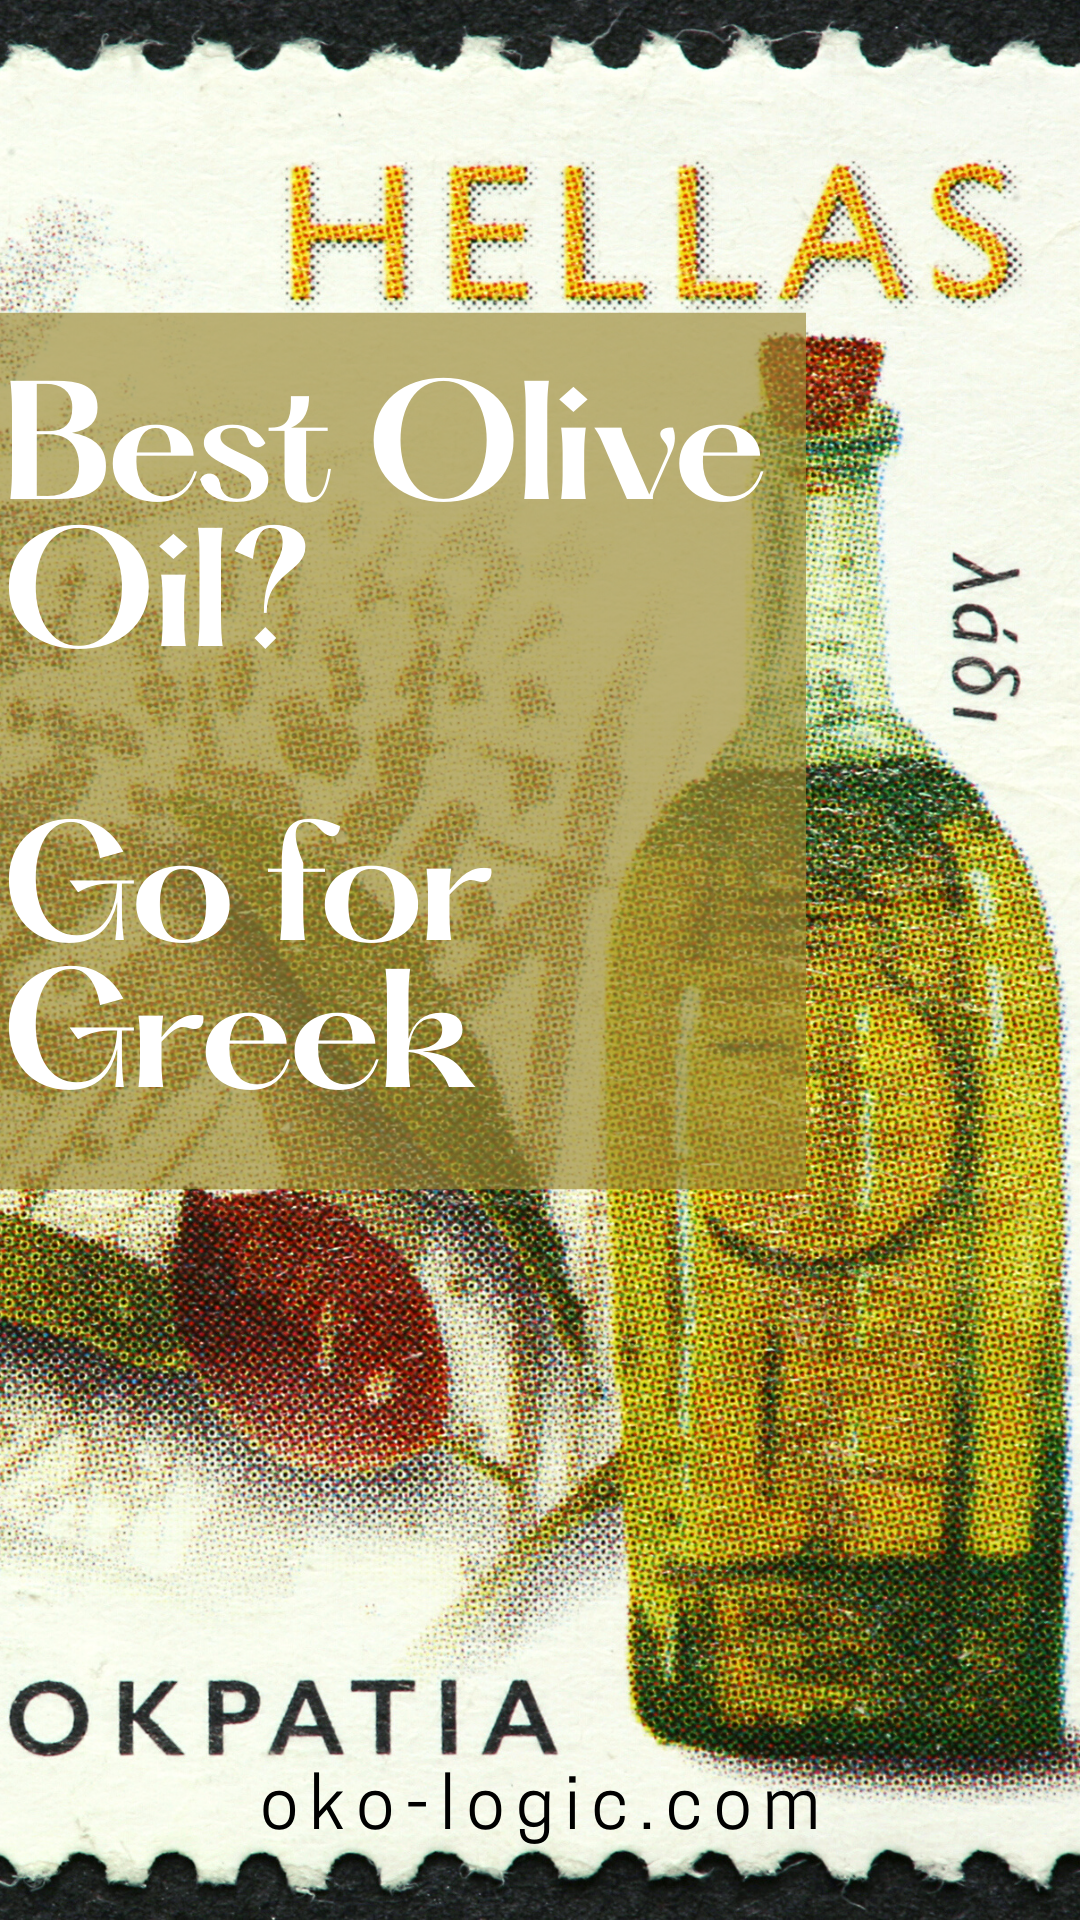 Why is Koroneiki Olive Oil the Best Oil for Your Health